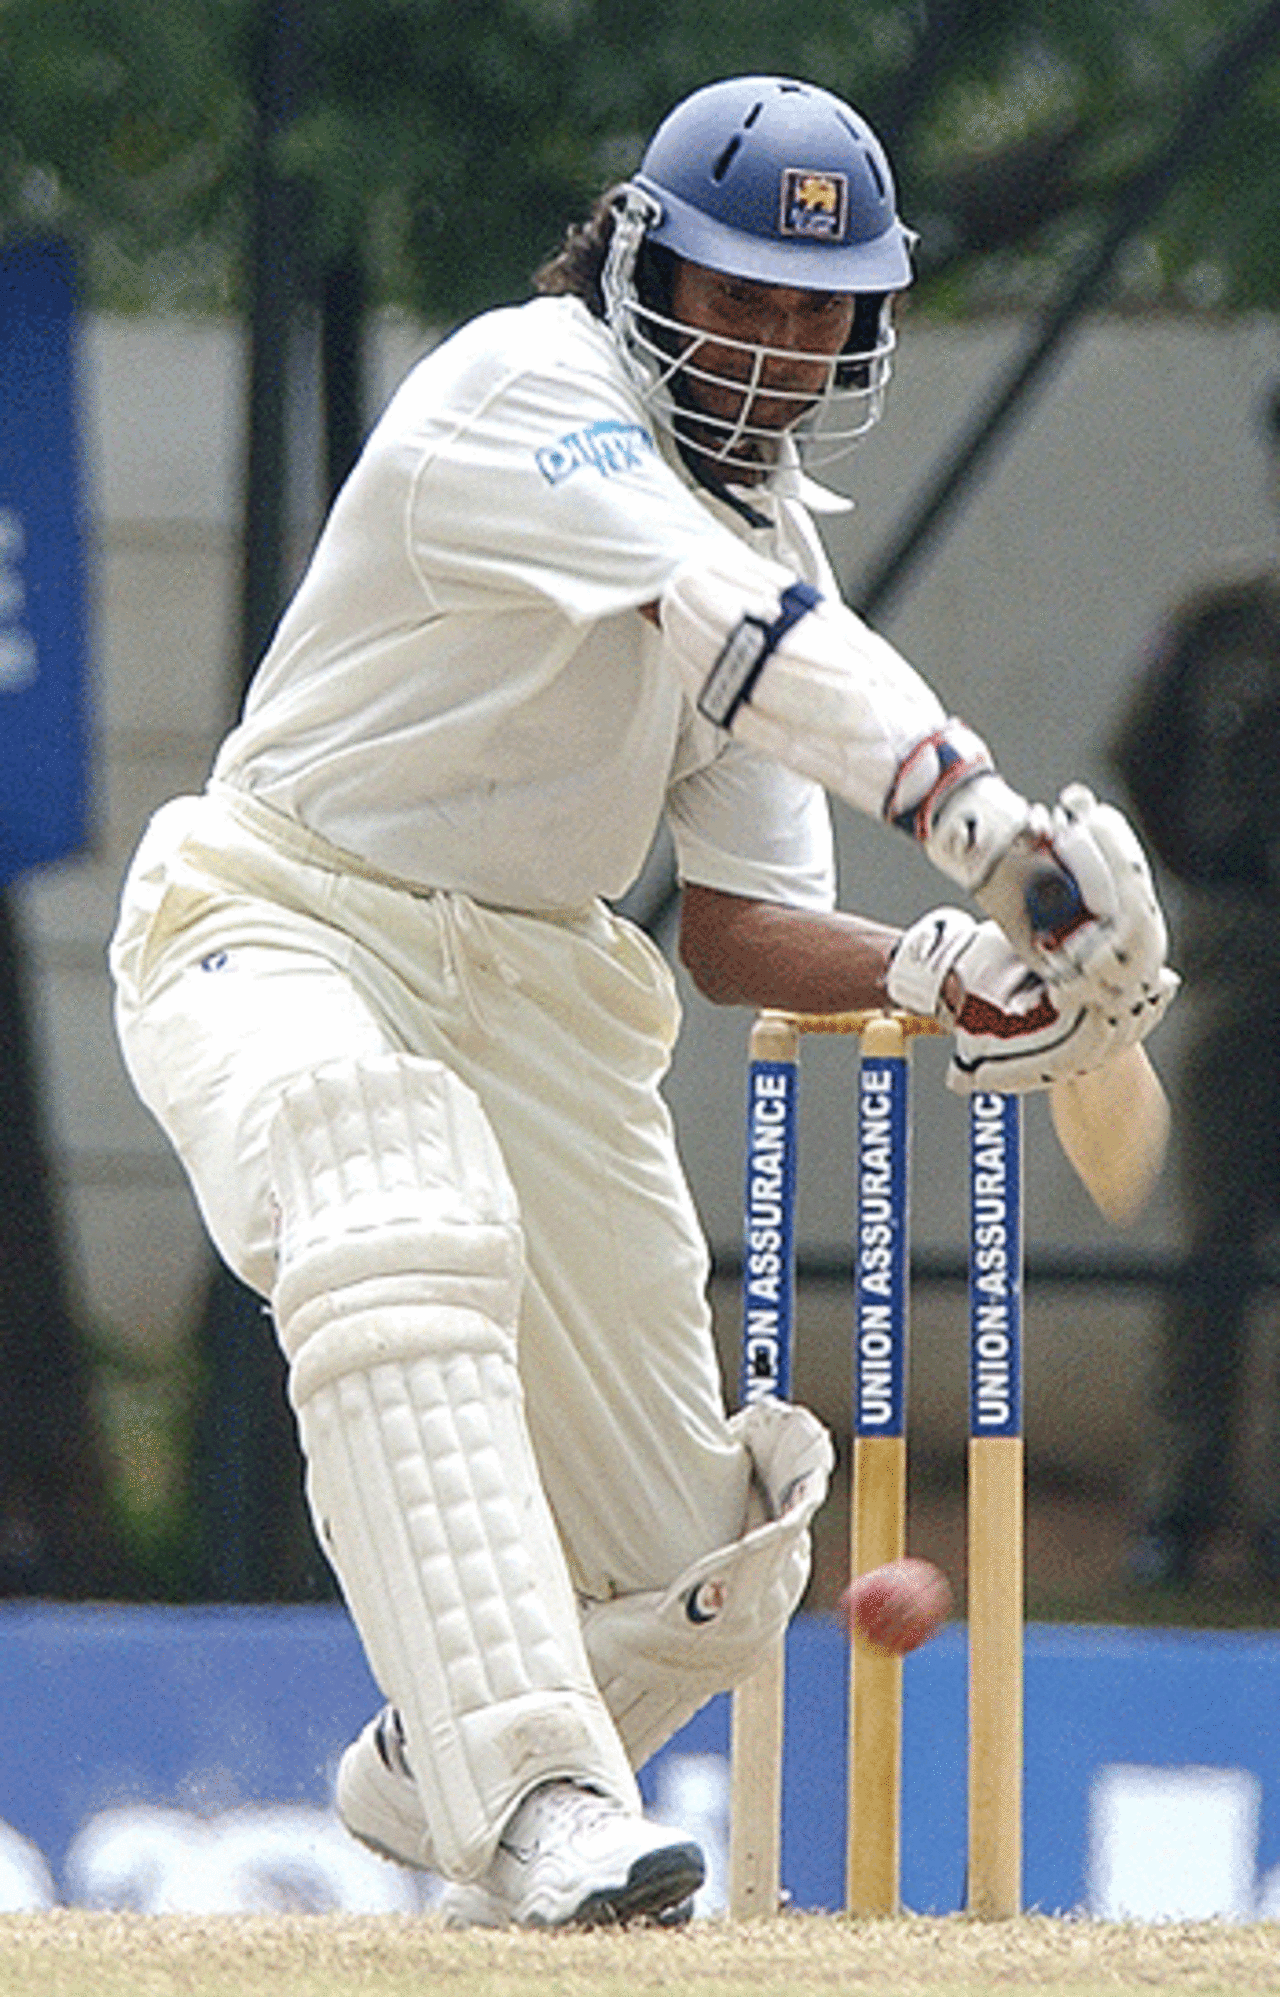 Kumar Sangakkara defends the wicket during the third day of the second and final test match between Sri Lanka and West Indies, at Asgiriya cricket grounds in Kandy, 23 July 2005